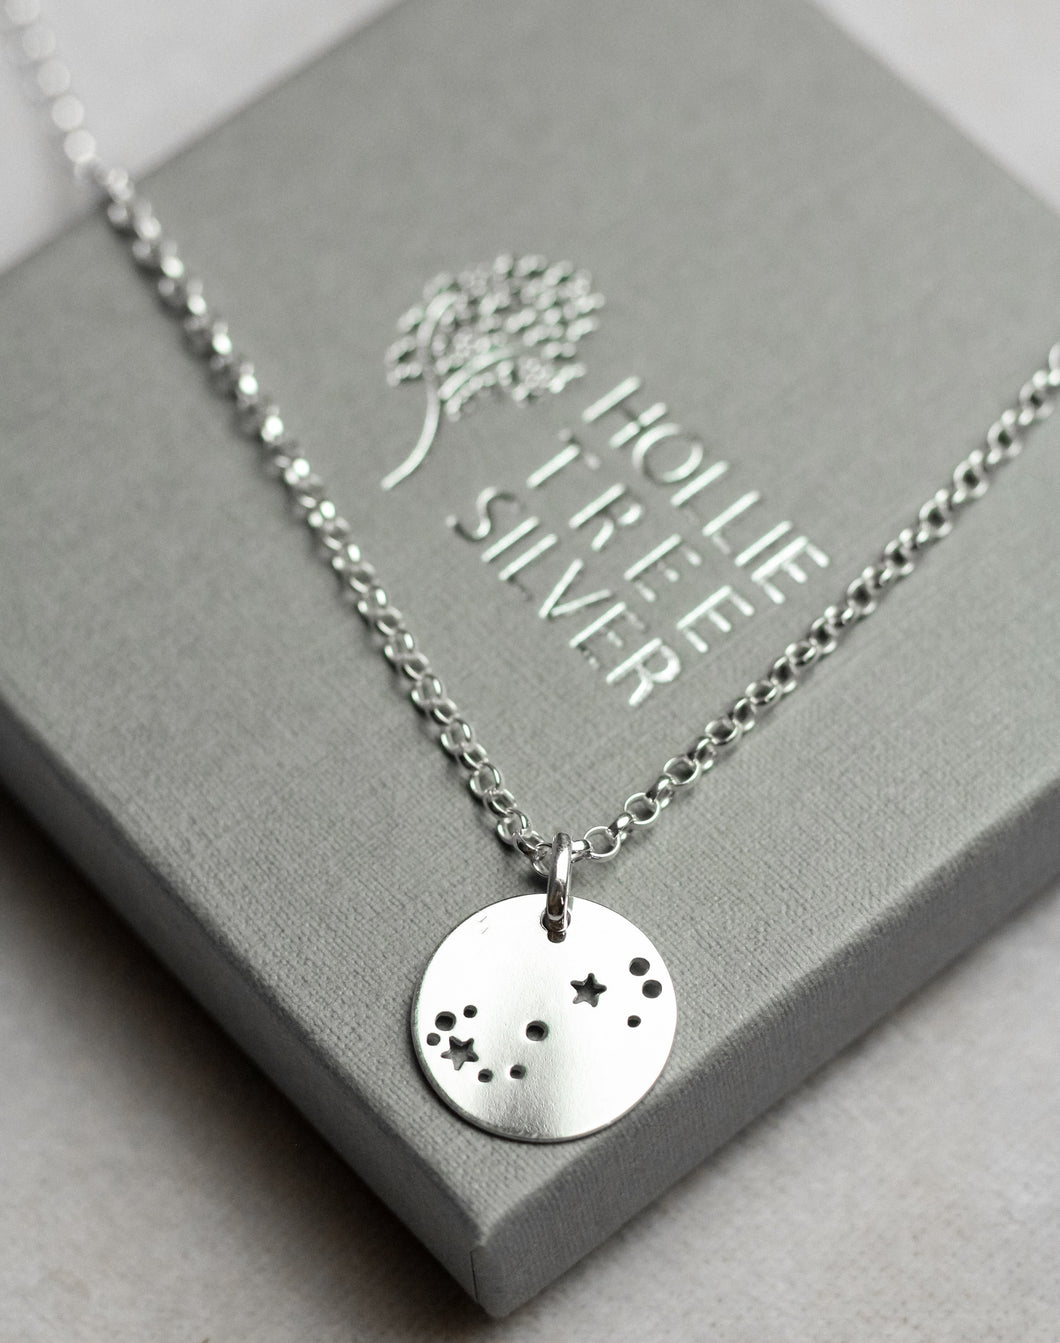 Scorpio Star Sign Constellation necklace in Sterling Silver